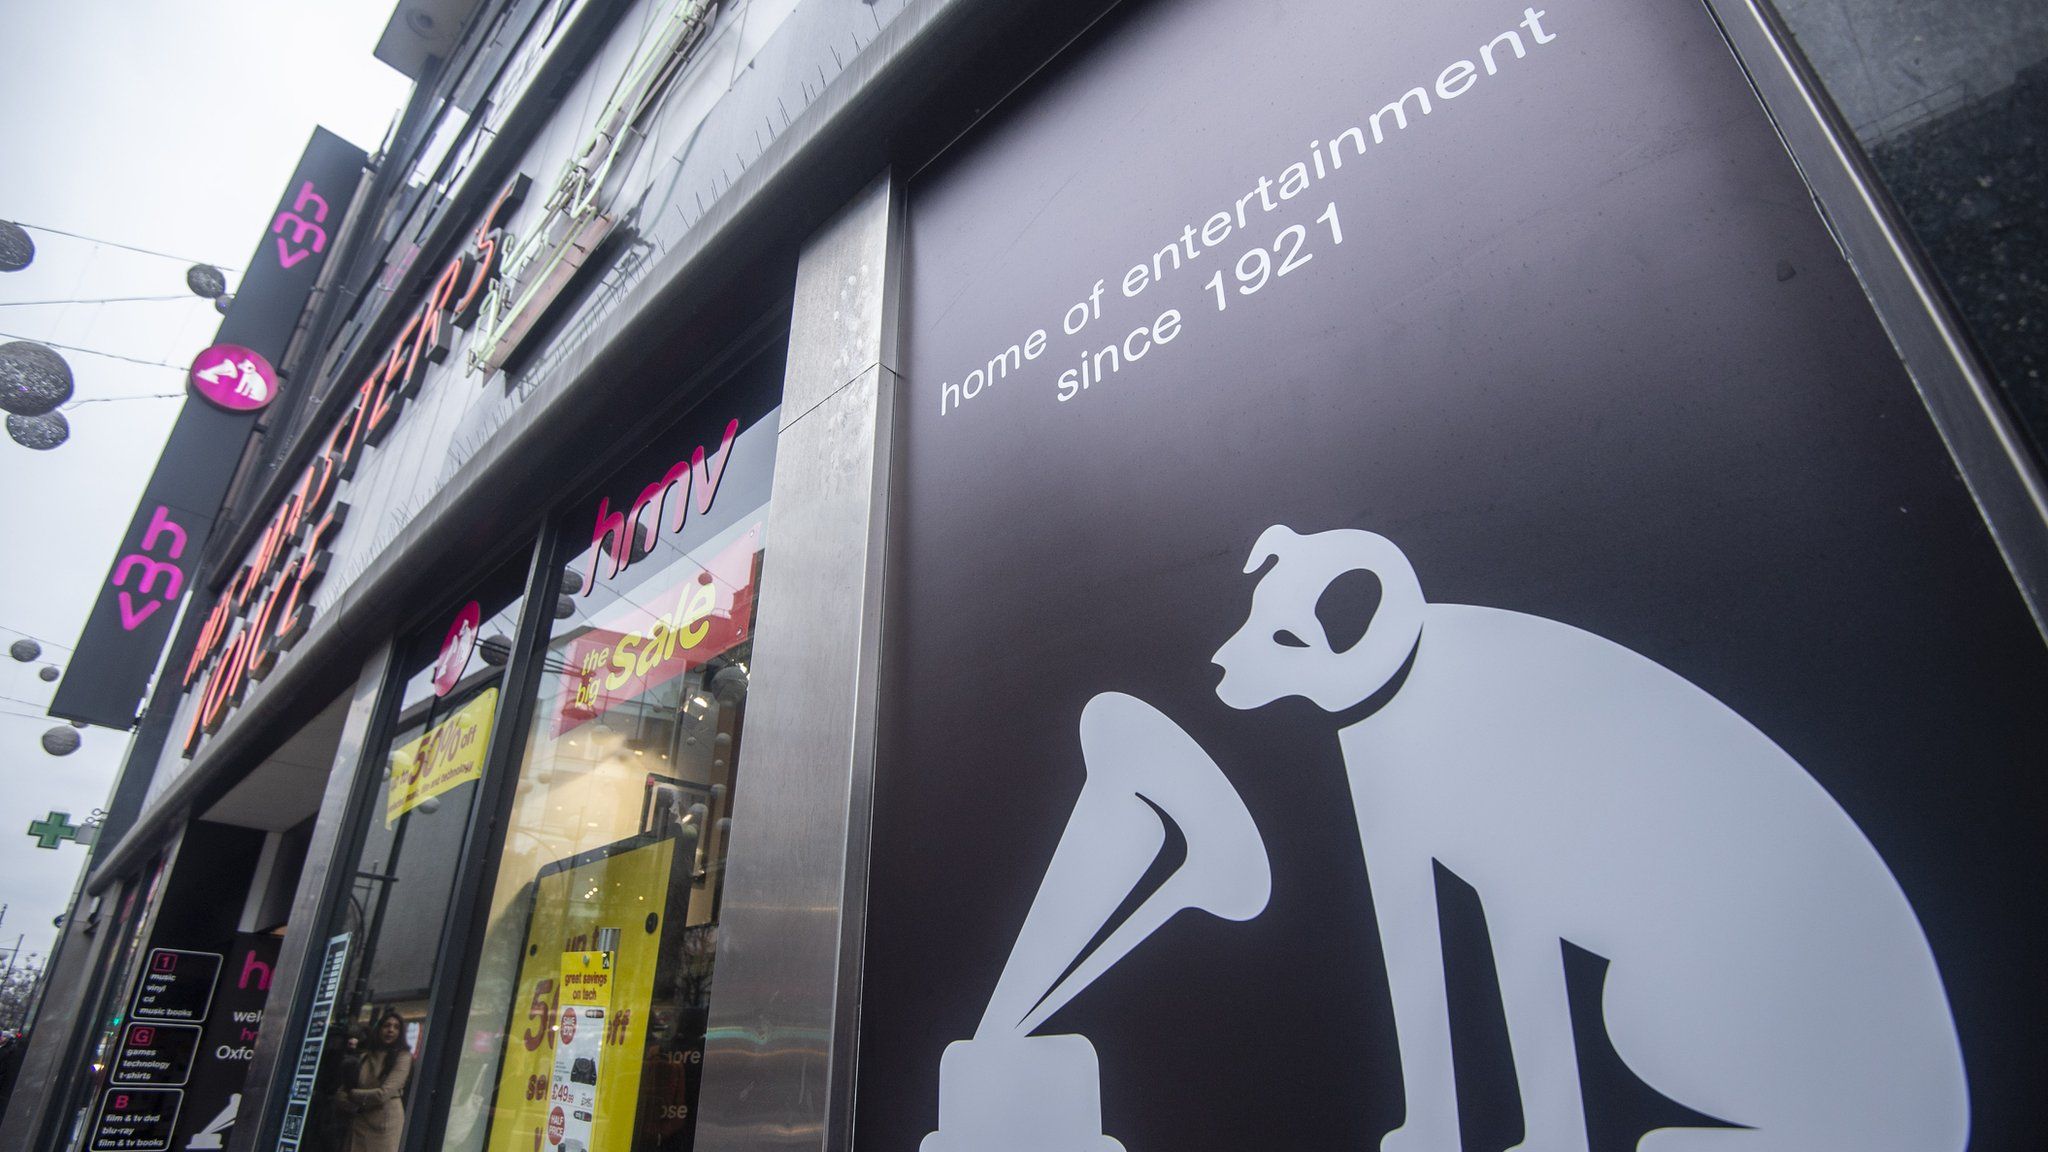 A picture shows the signage on the front of a HMV store in central London on December 28, 2018. - British music retailer HMV, which was launched by English composer Edward Elgar in 1921, has collapsed into administration after weak Christmas sales and amid a declining market for CDs and DVDs, its owner said on December 28